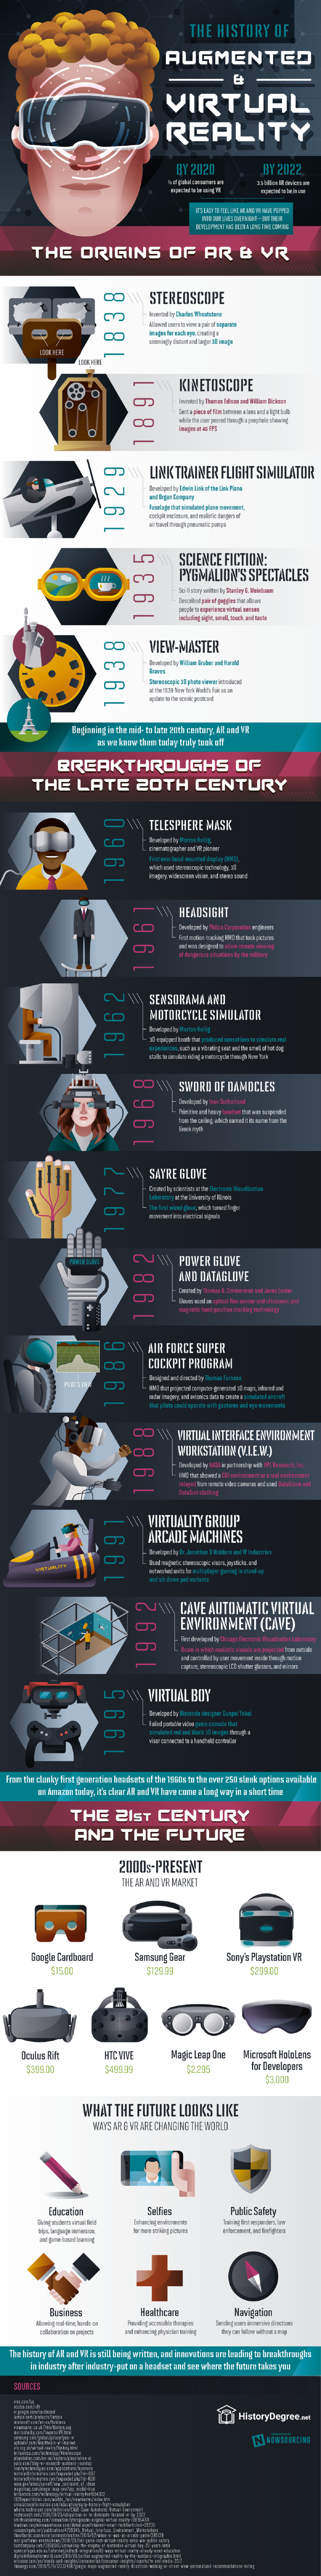 The History of Augmented and Virtual Reality #infographic